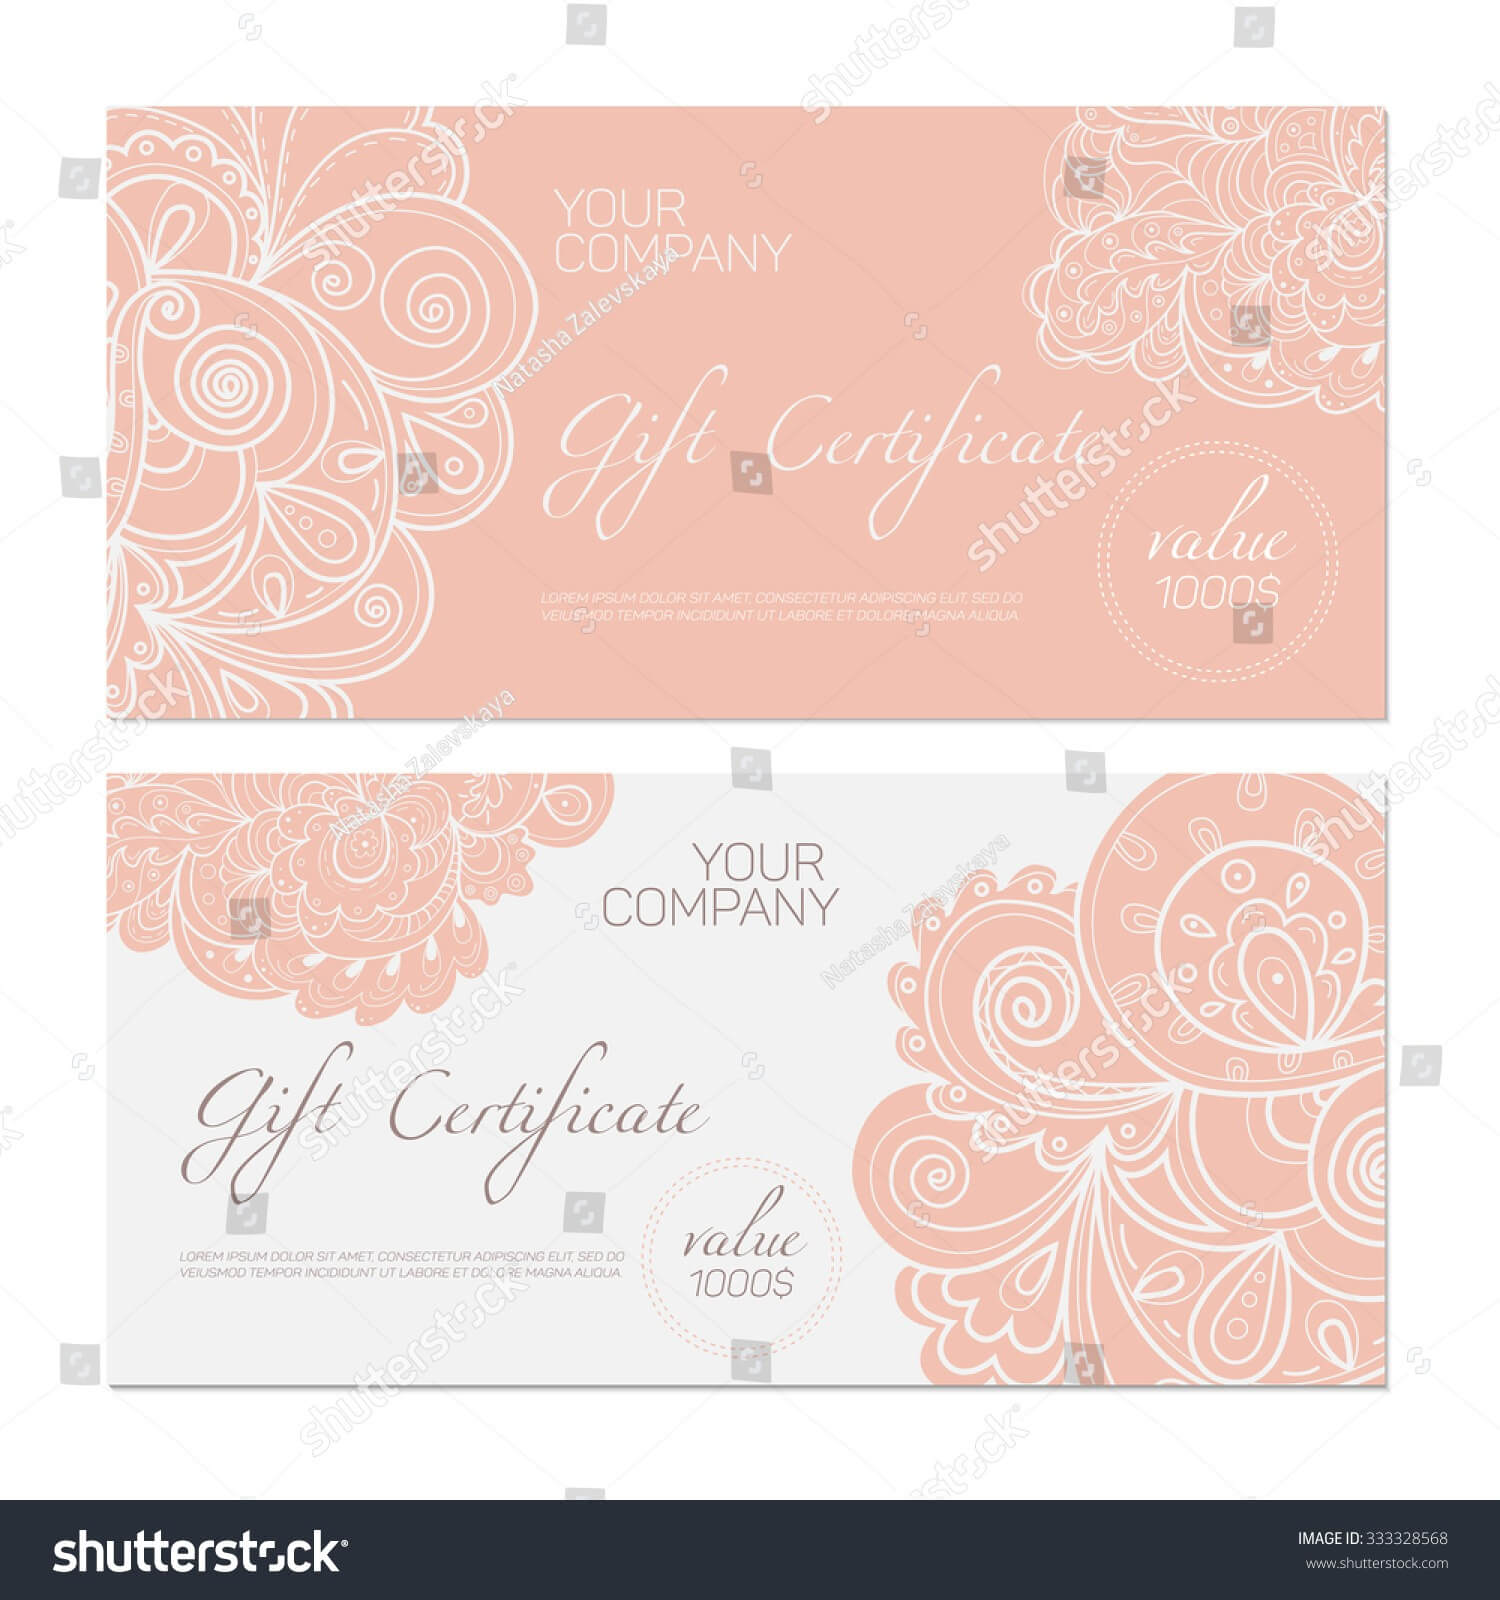 Elegant Gift Certificate Template Abstract Ornamental Stock Regarding Elegant Gift Certificate Template